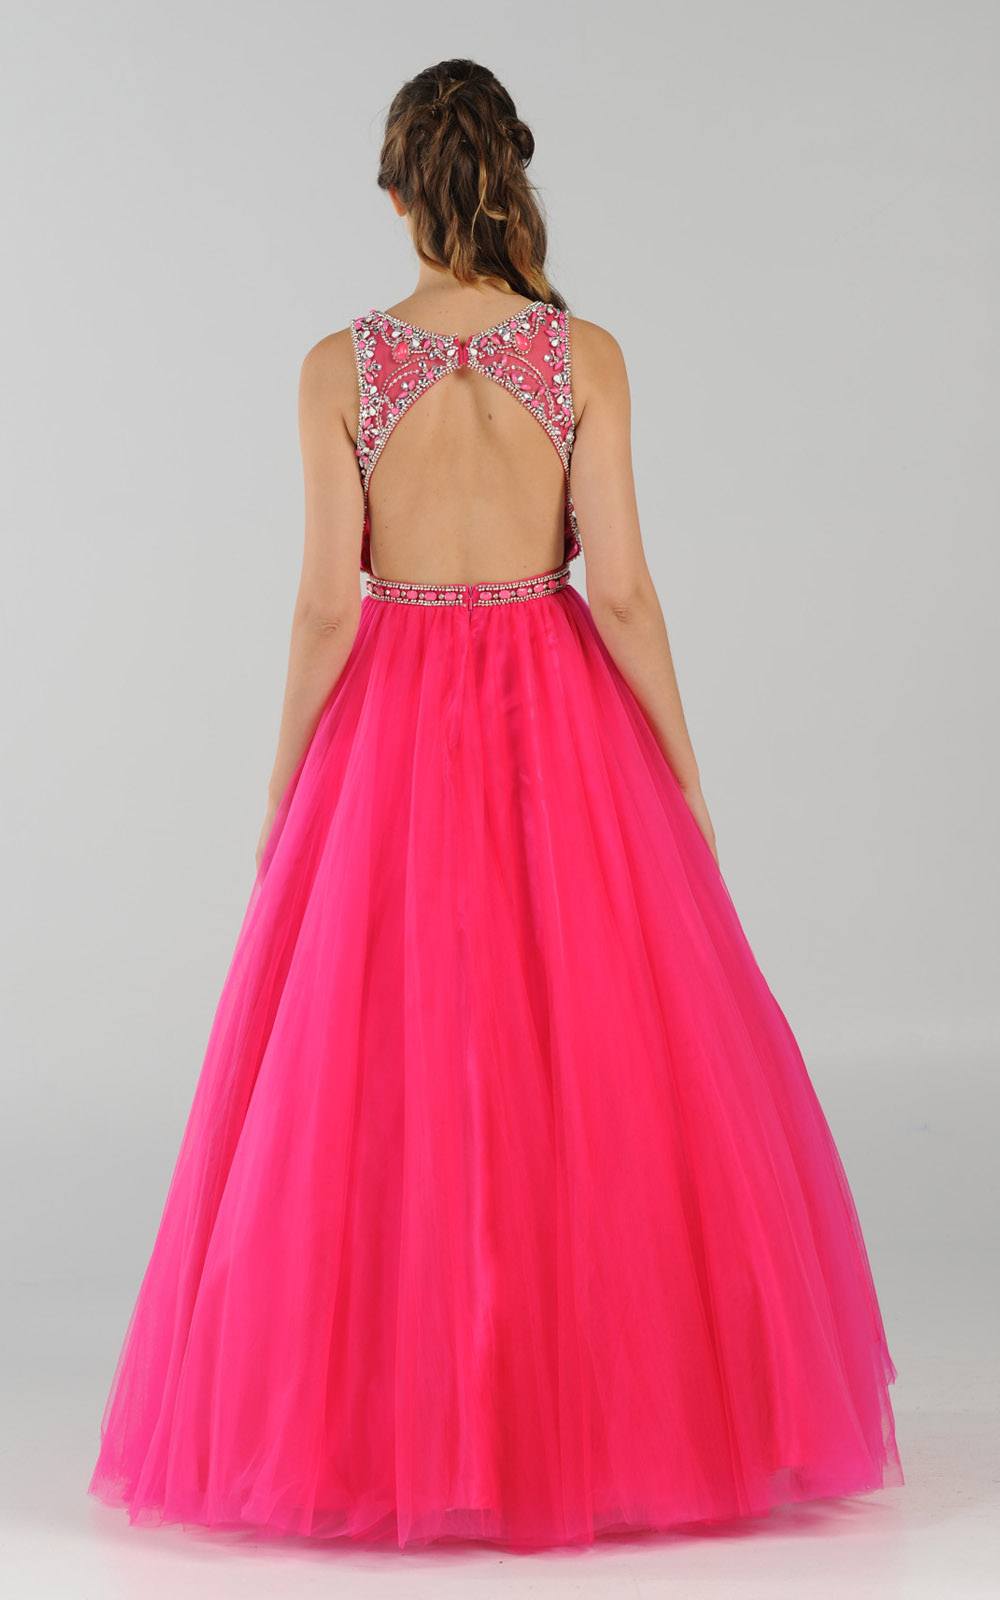 Poly USA 7940 Cut-Out Back Beaded Illusion Bodice Mesh Ball Gown Sleeveless Fuchsia Back View